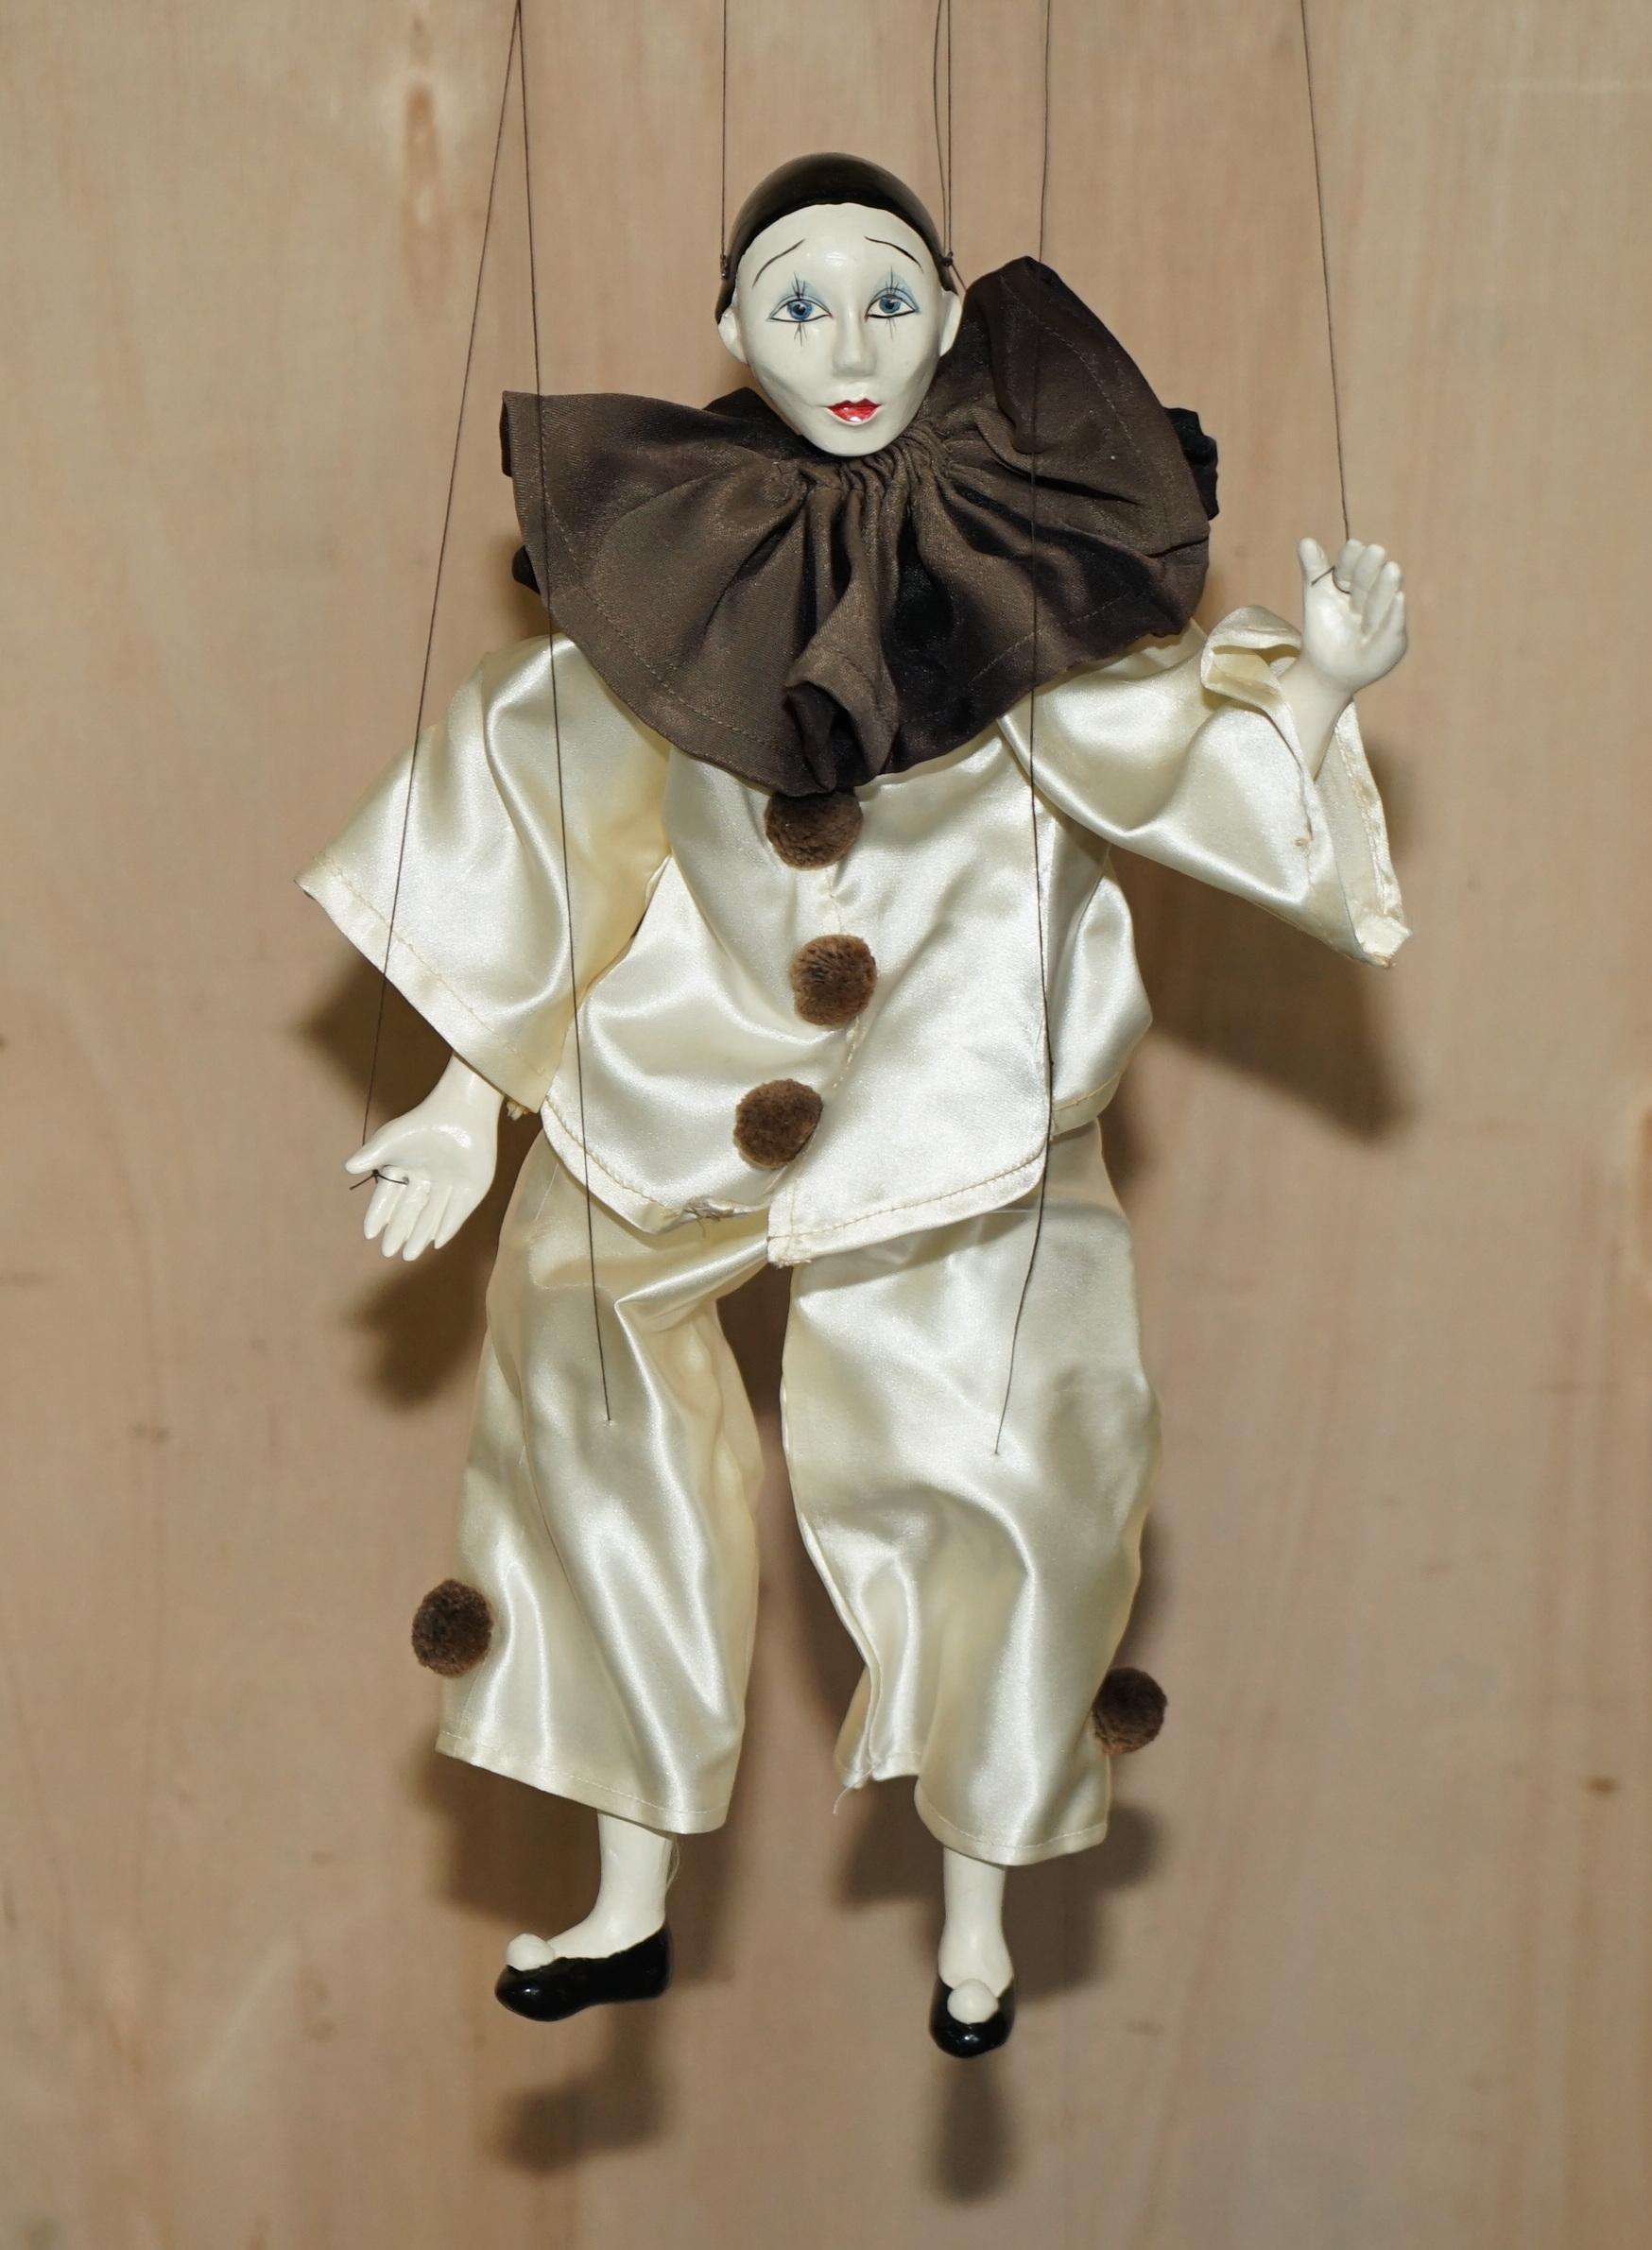 Original New Old Stock Circa 1900 Liberty's London Marionette String Puppet For Sale 3